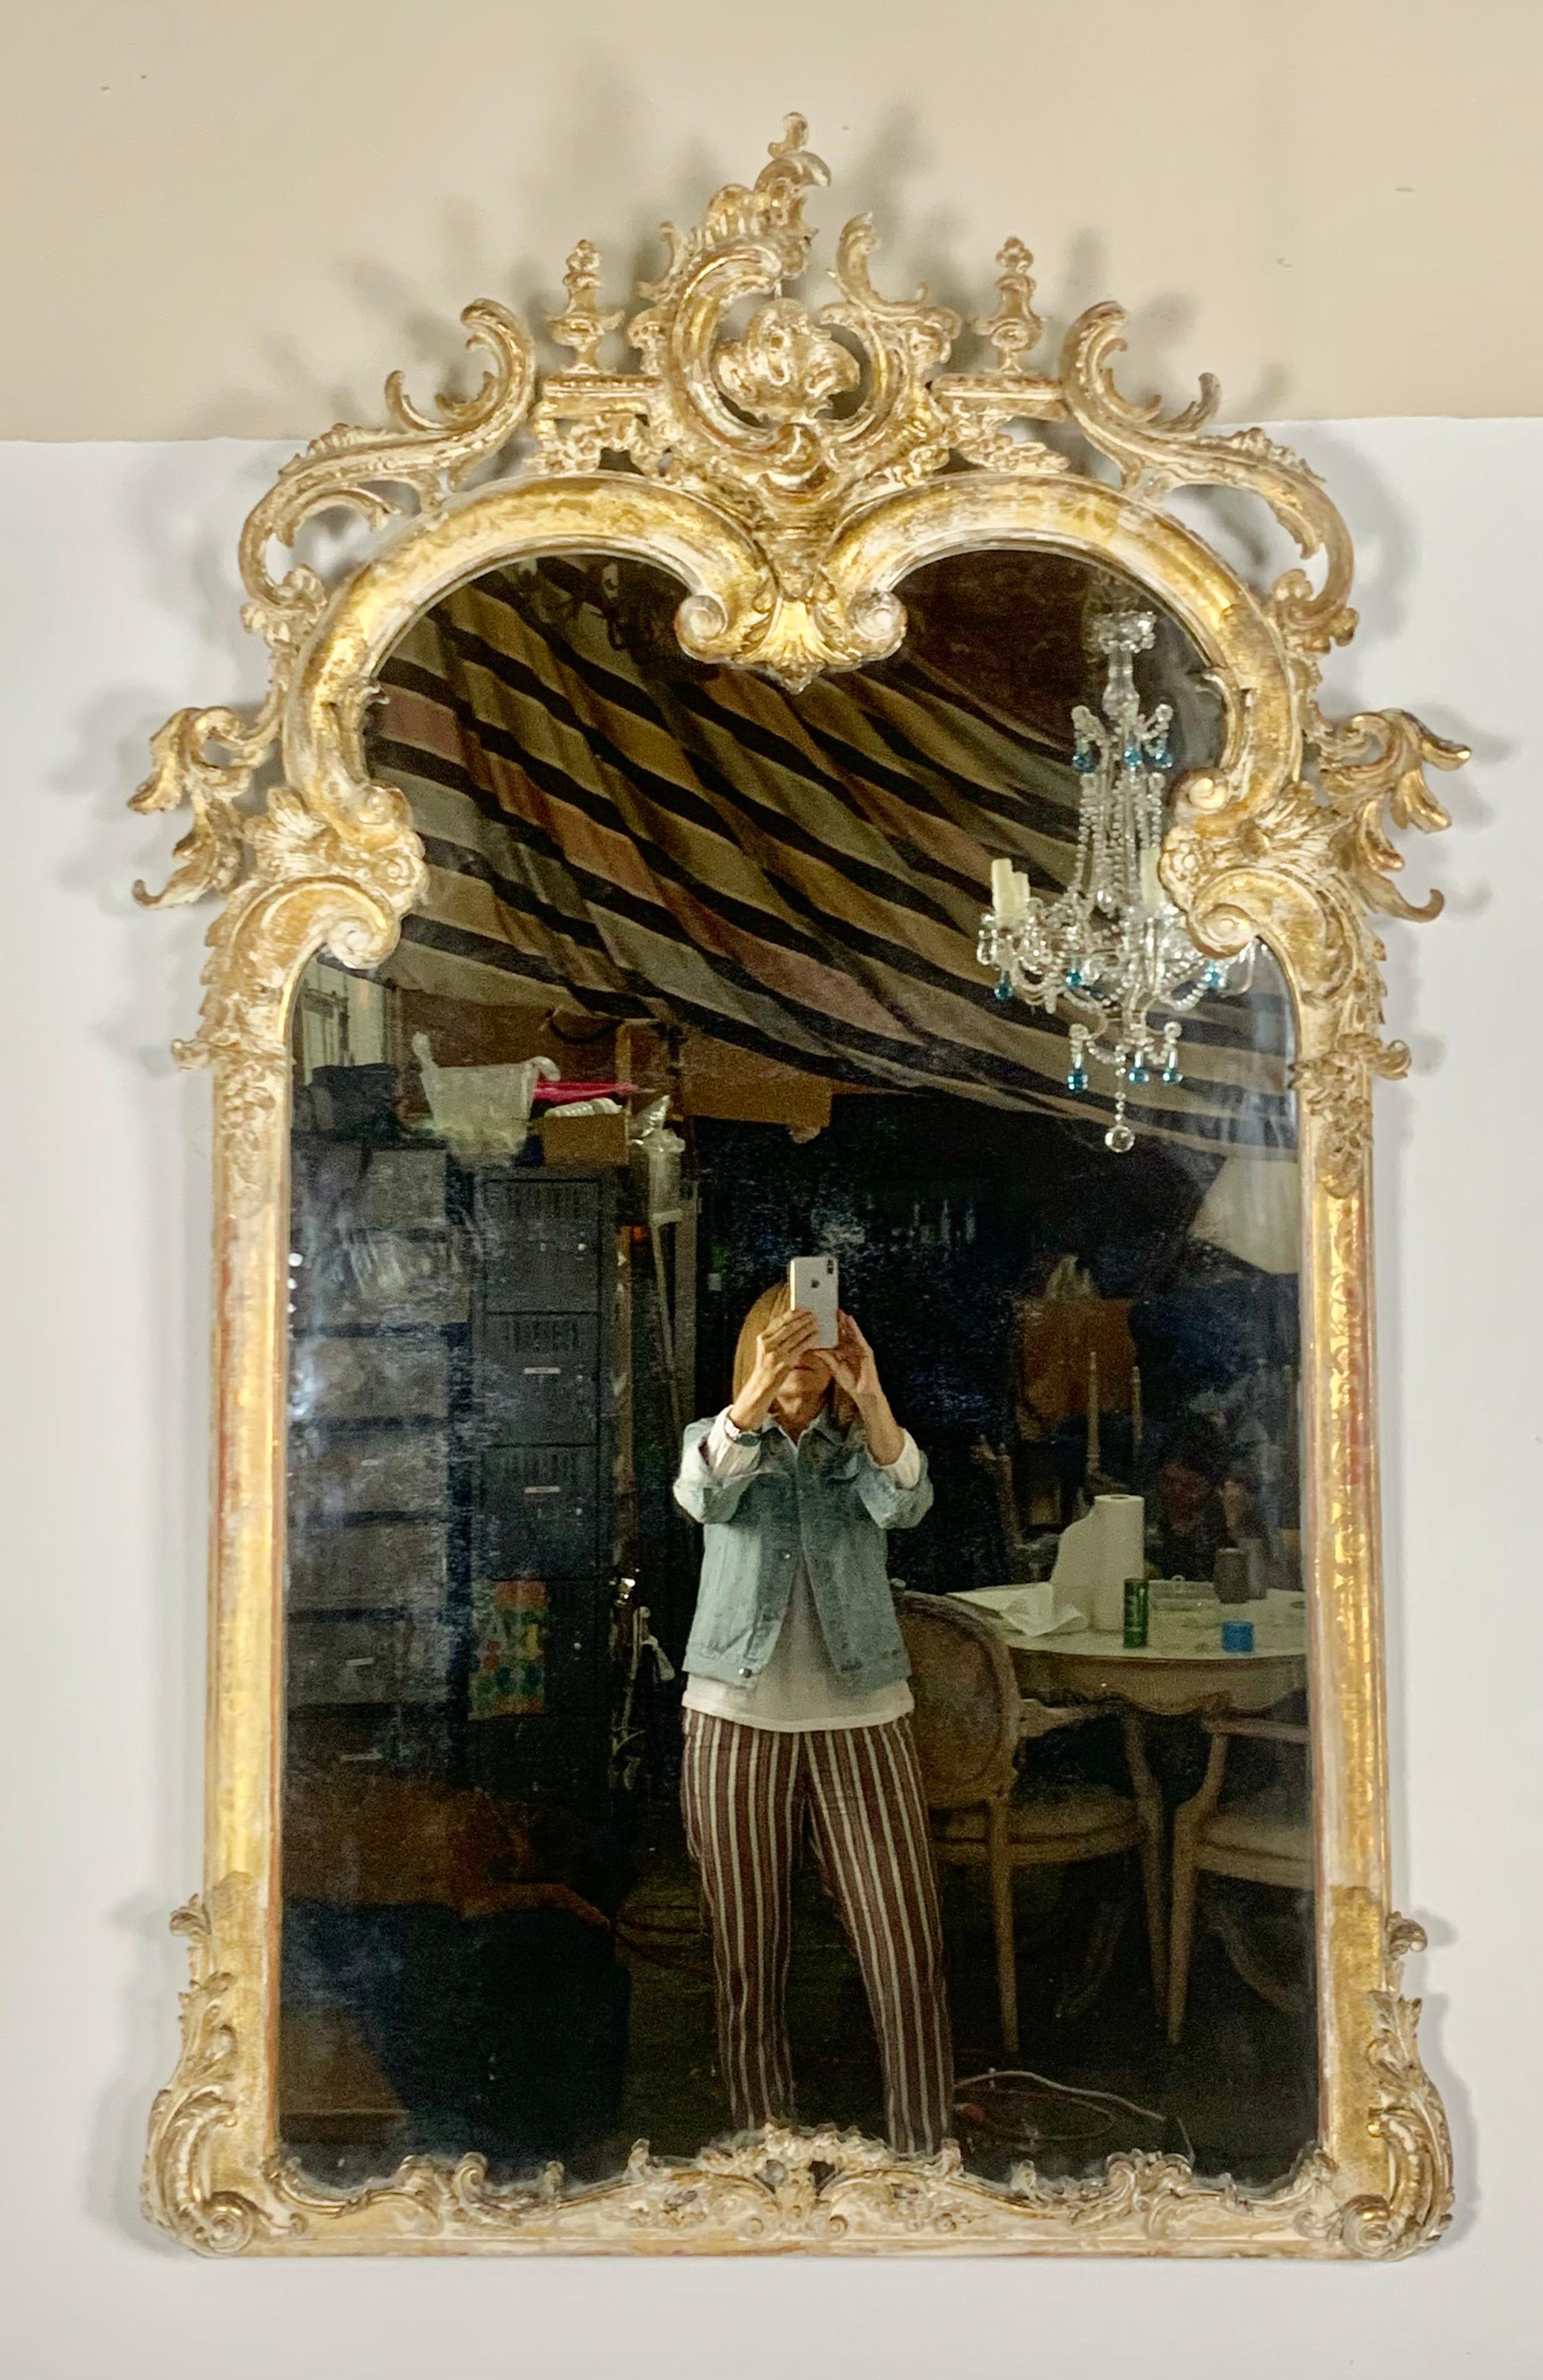 19th C. monumental sized French gilt wood Rococo style mirror. The frame is decorated with scrolled acanthus leaves throughout. The finish is beautifully worn & distressed with missing gold leaf throughout. The mirror still has remnants of beautiful